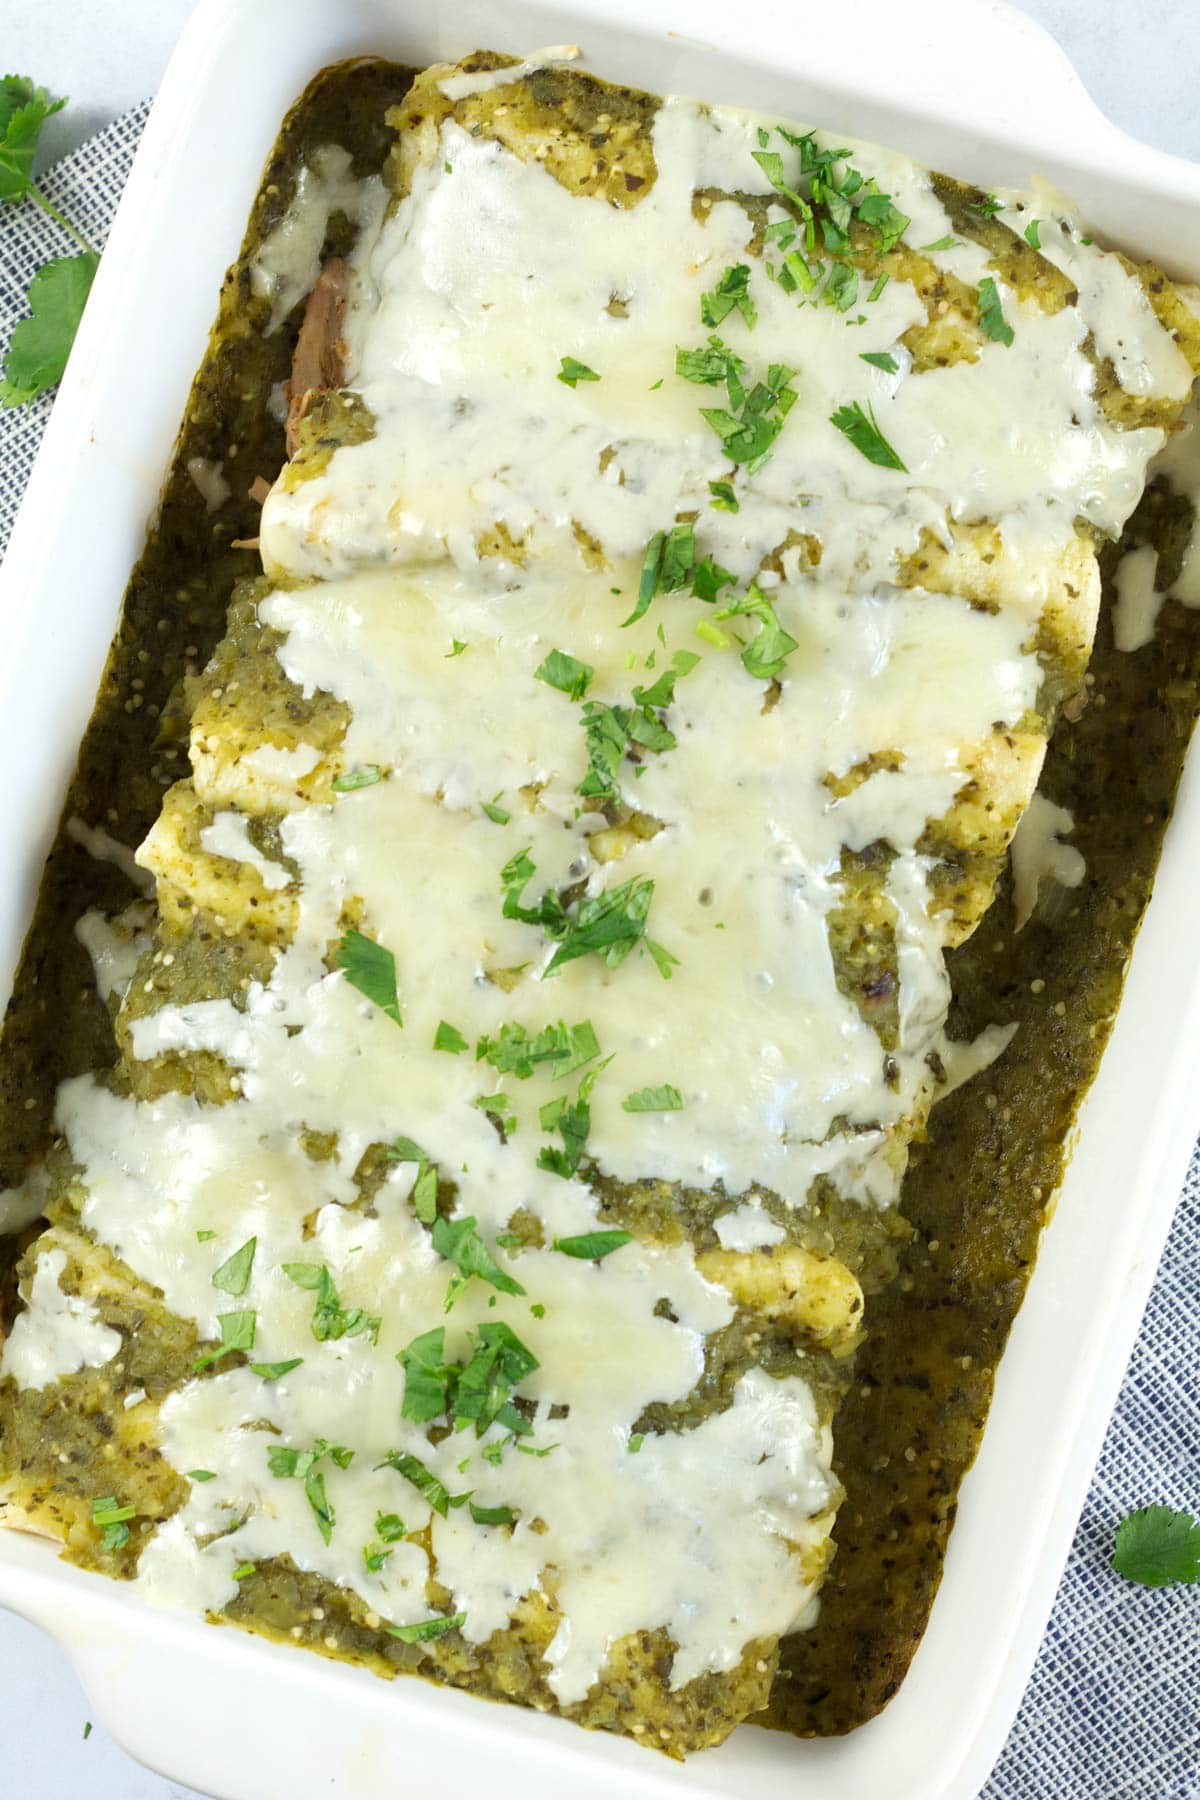 Pan of fully baked honey lime chicken enchiladas with green verde sauce.